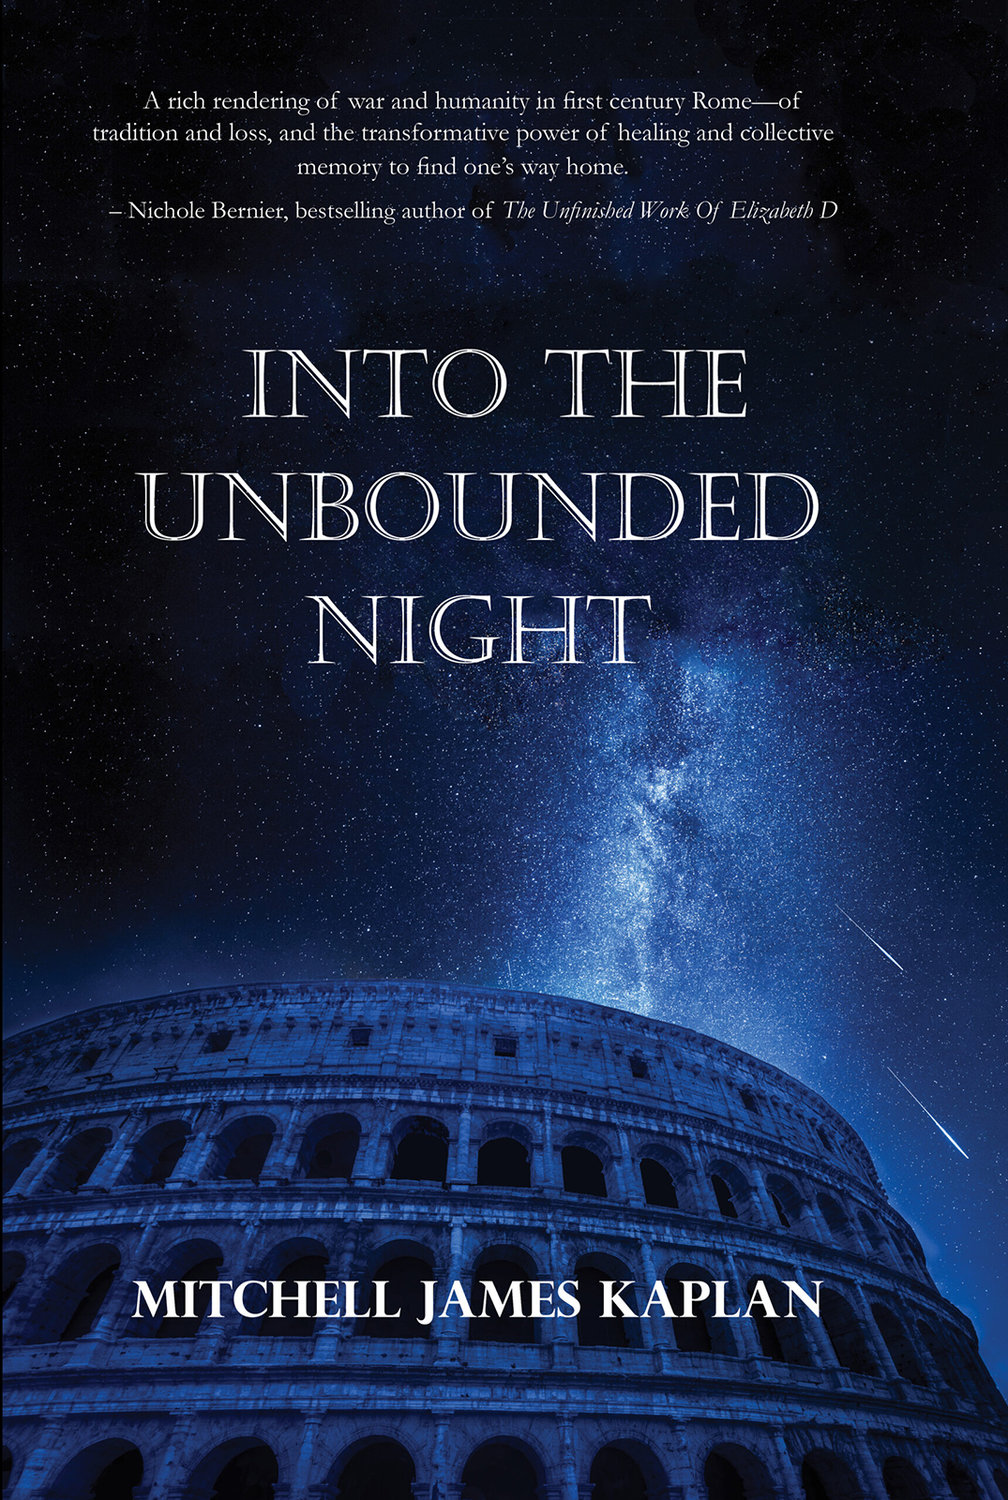 Into the Unbounded Night by Mitchell James Kaplan